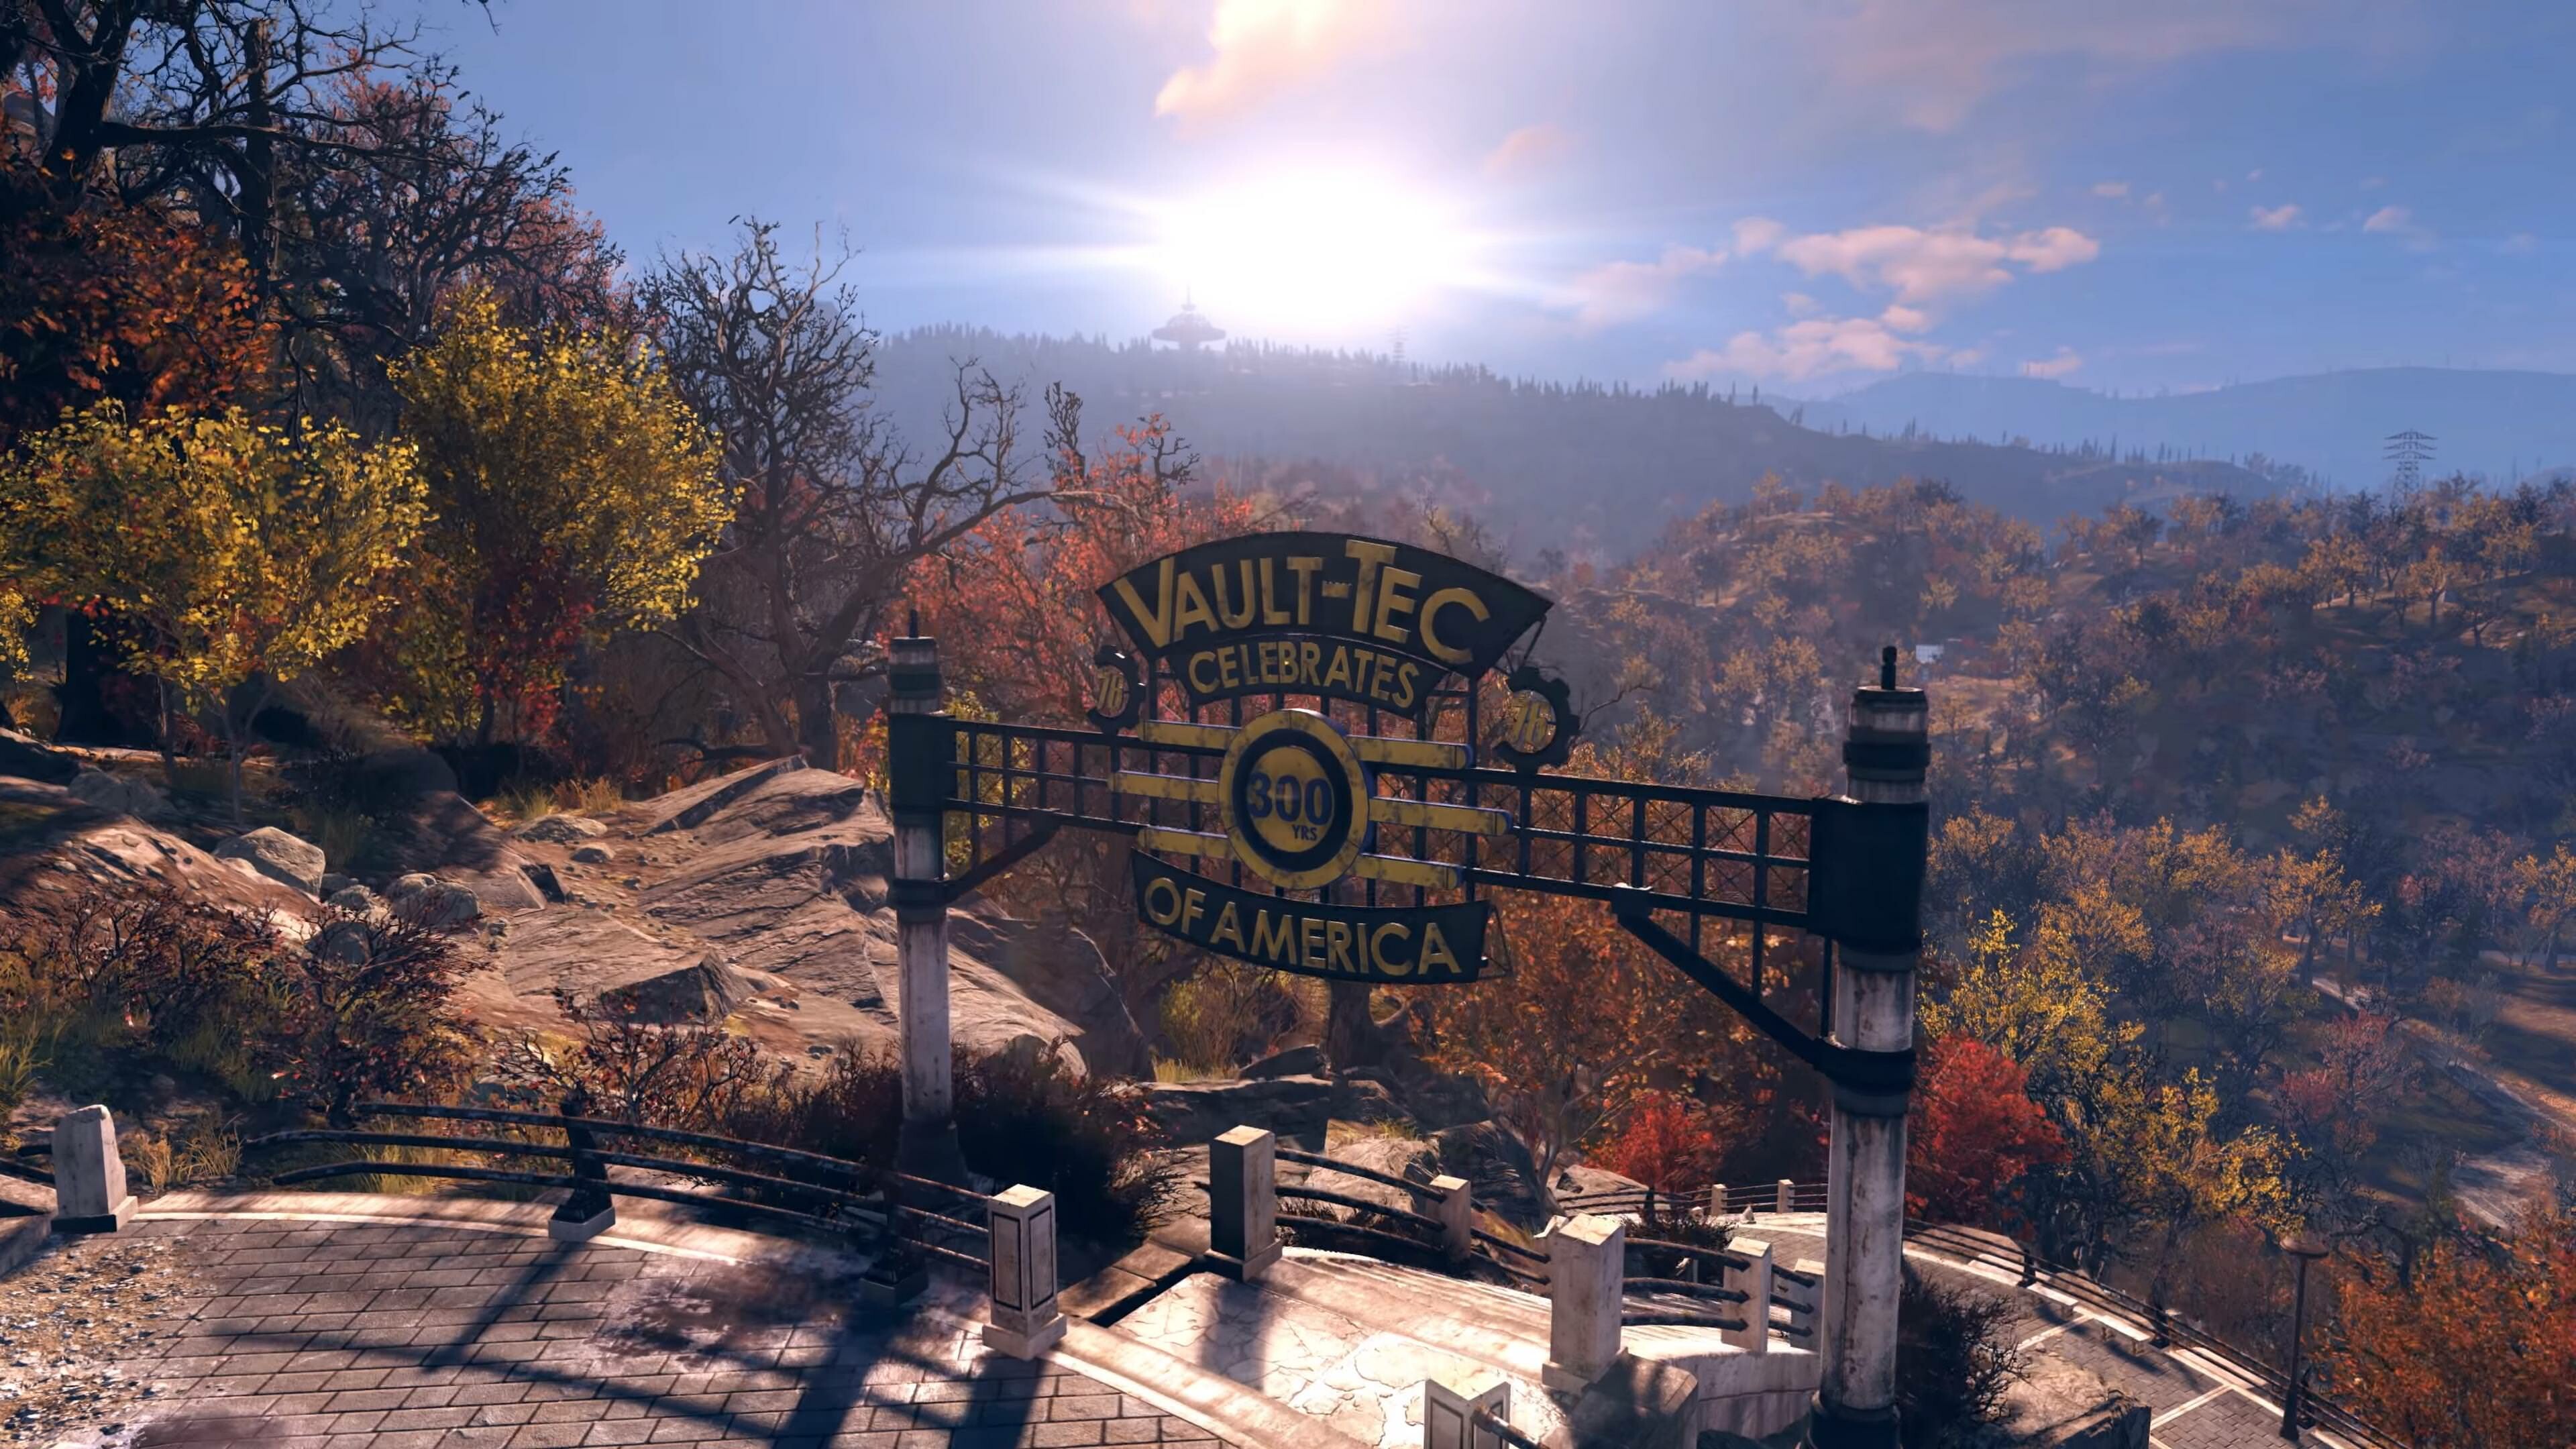 Fallout: FO76, A post-apocalyptic multiplayer online role-playing game developed by Bethesda Game Studios. 3840x2160 4K Wallpaper.